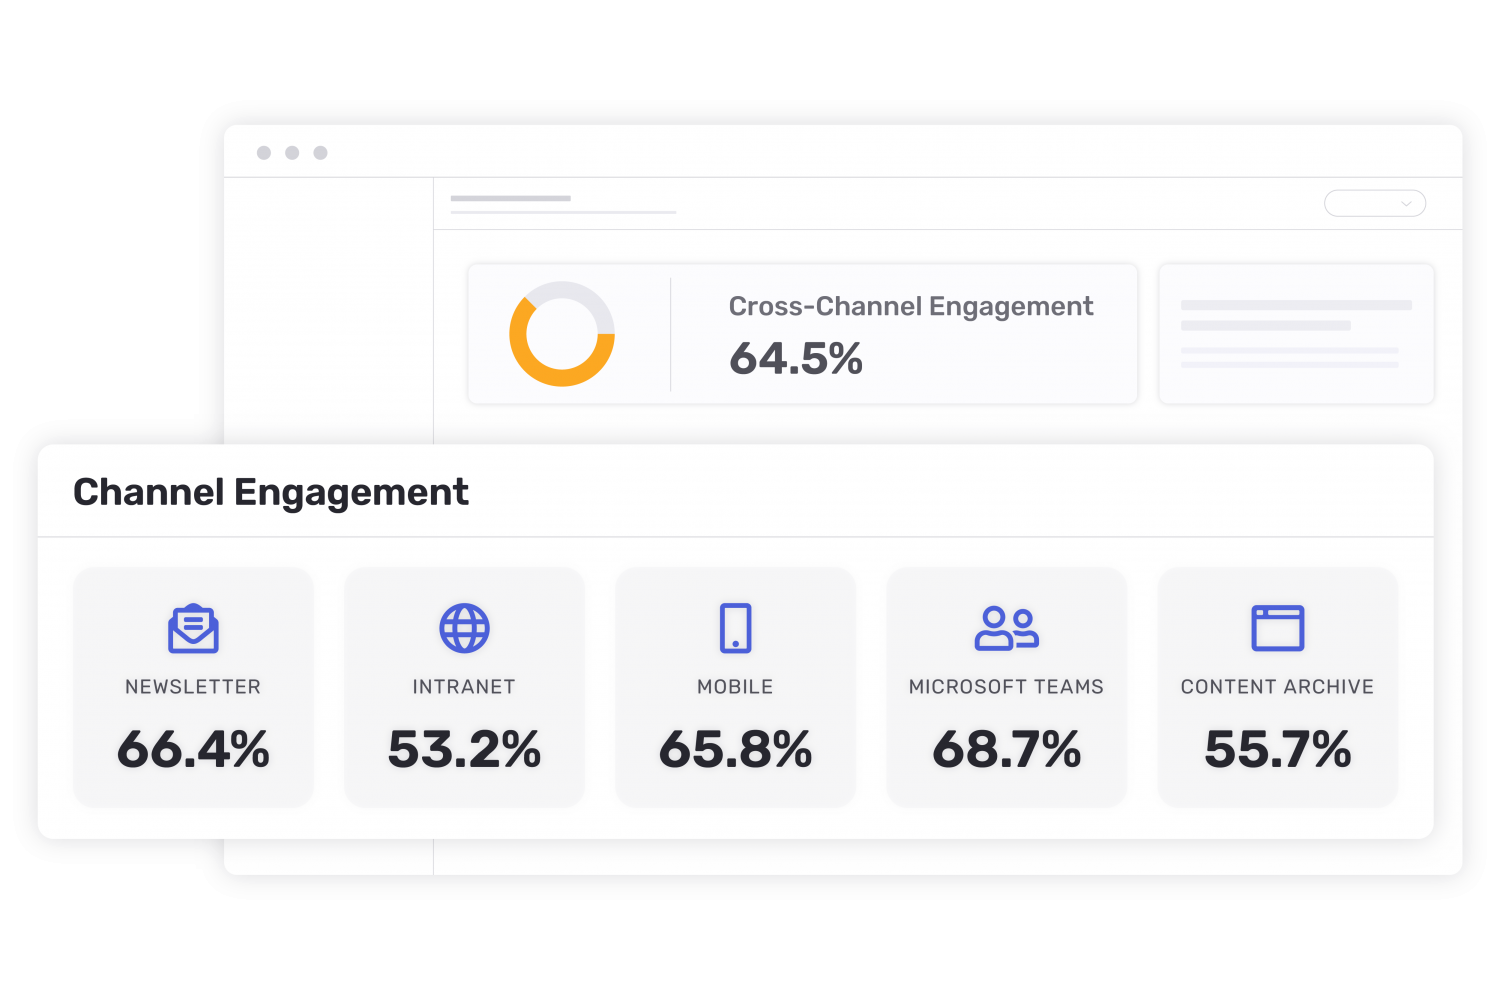 Cross-channel engagement at 64.5% and showcasing channel engagement with 66.4% newsletter, 53.2% intranet, 65.8% mobile, 68.7% Microsoft Teams and 55.7% Content Archive